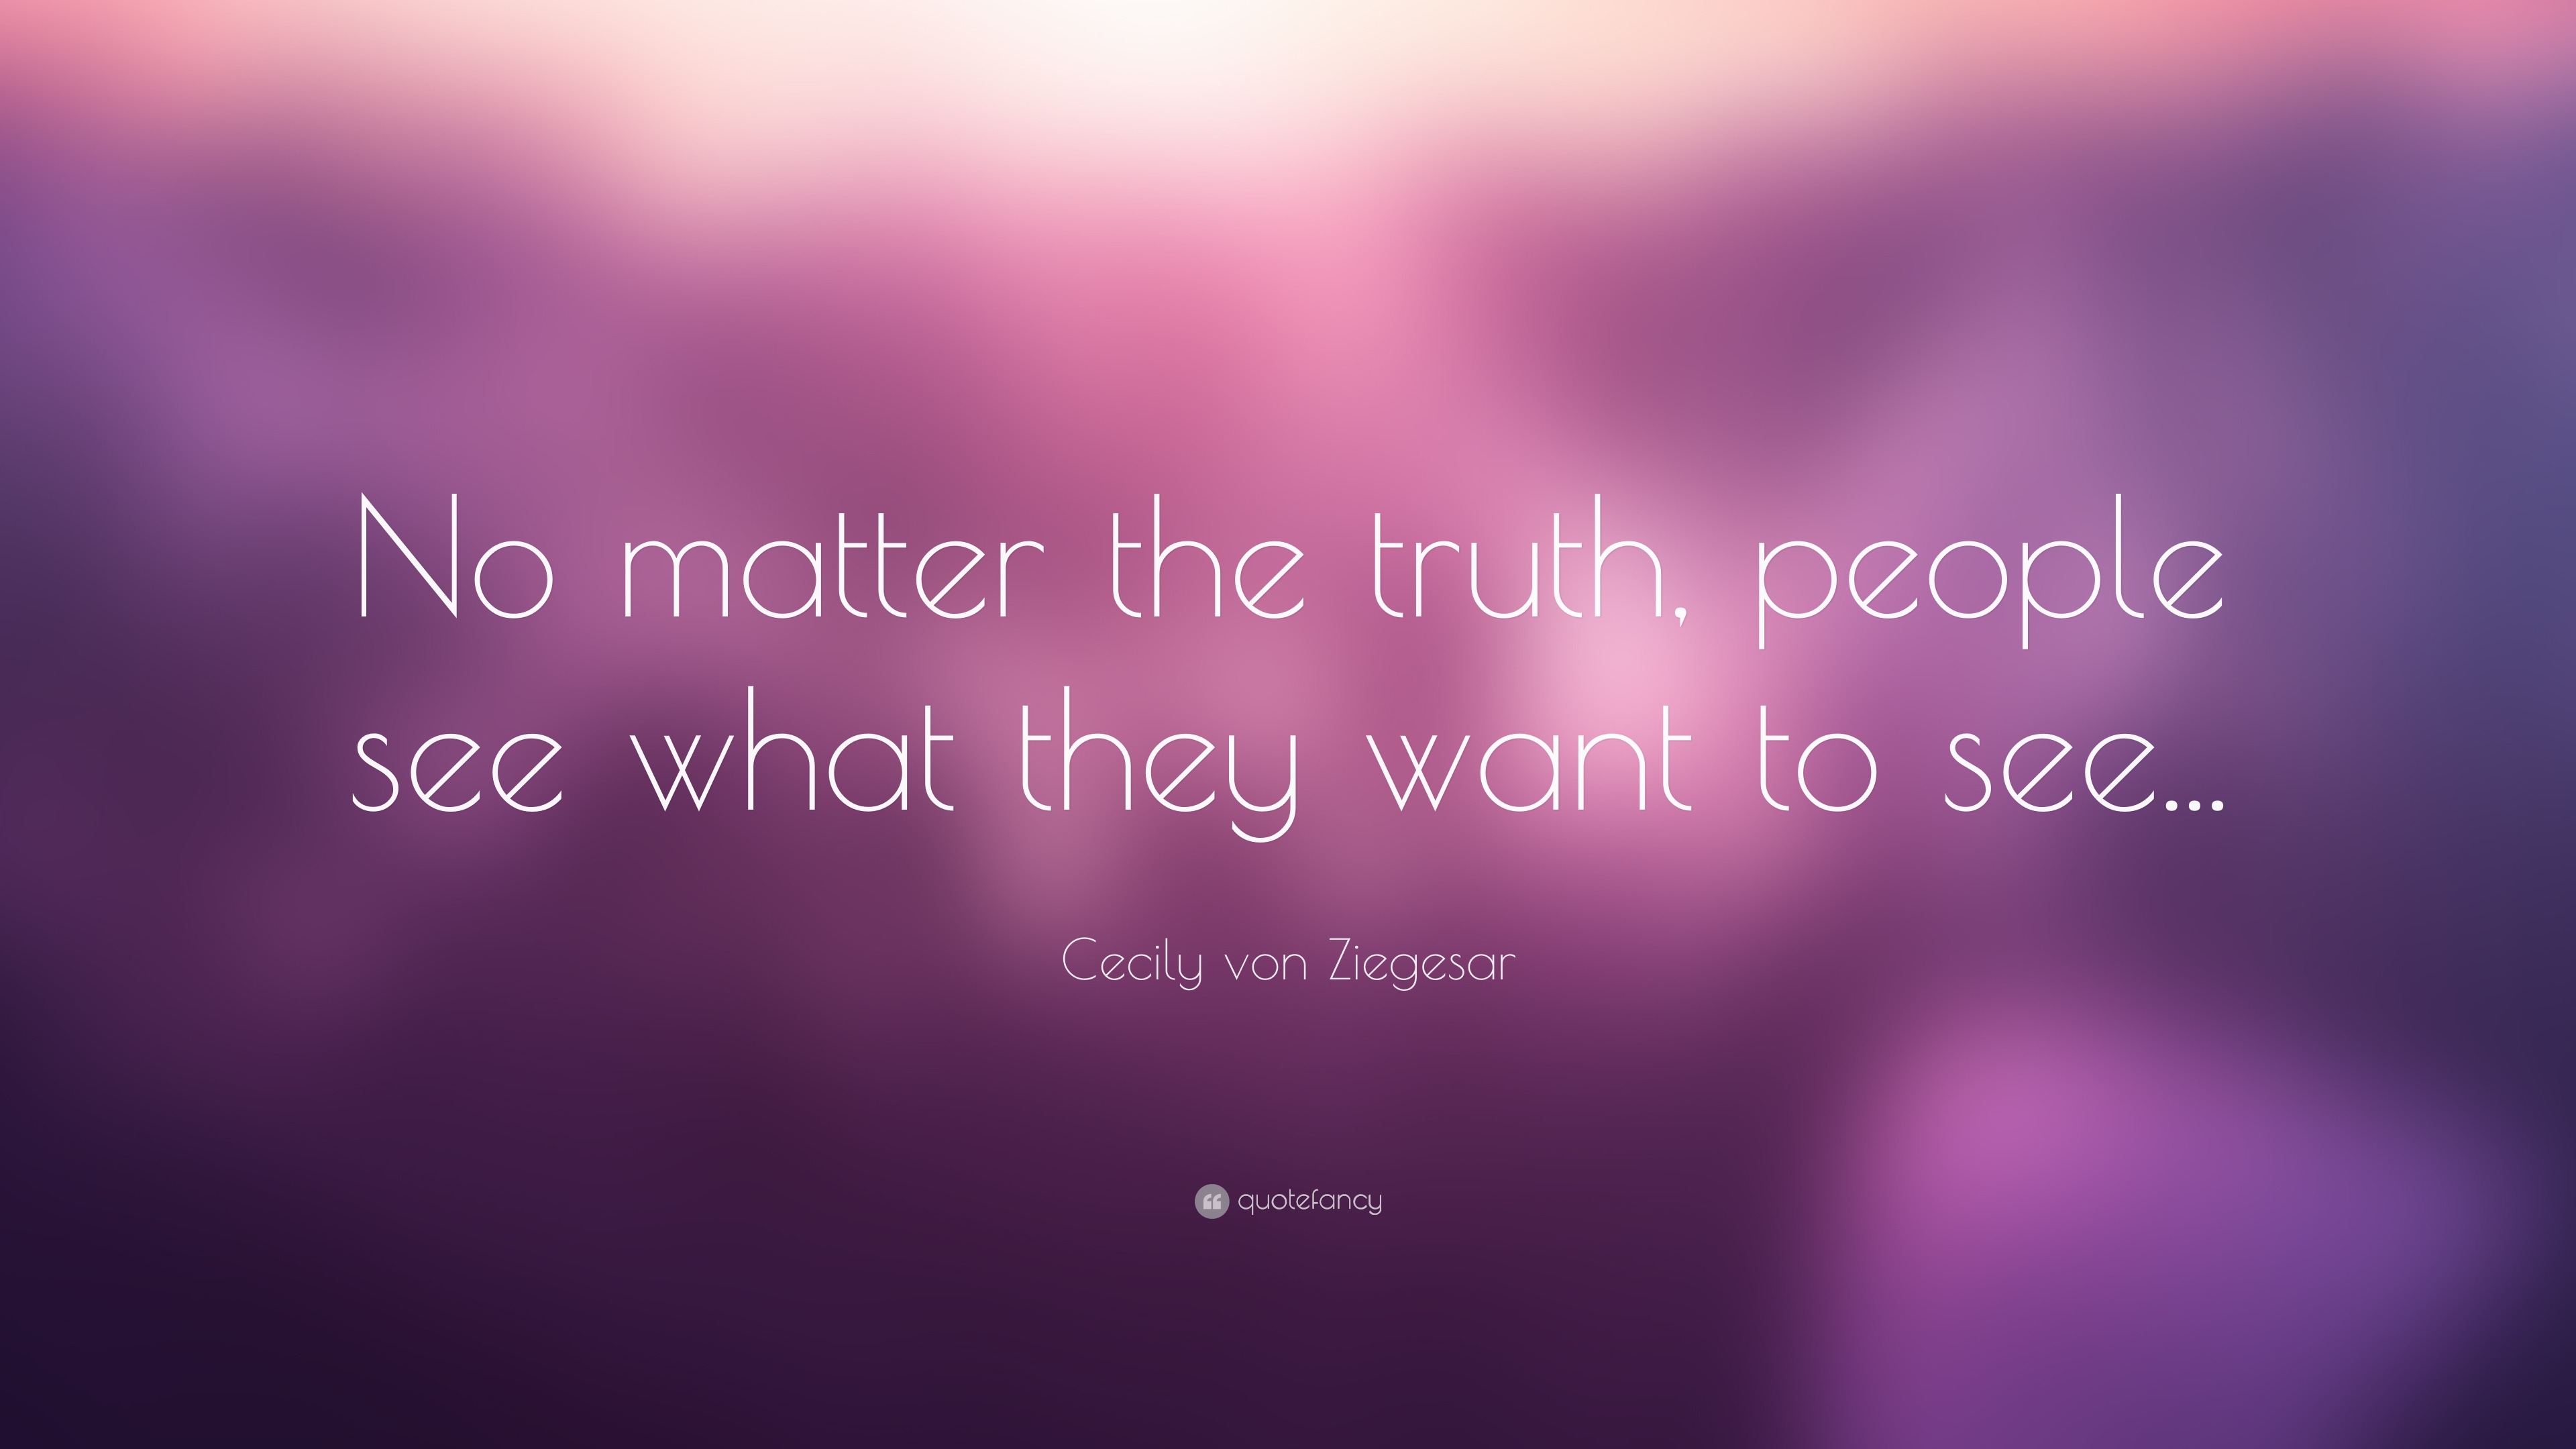 Cecily von Ziegesar Quote: “No matter the truth, people see what they ...